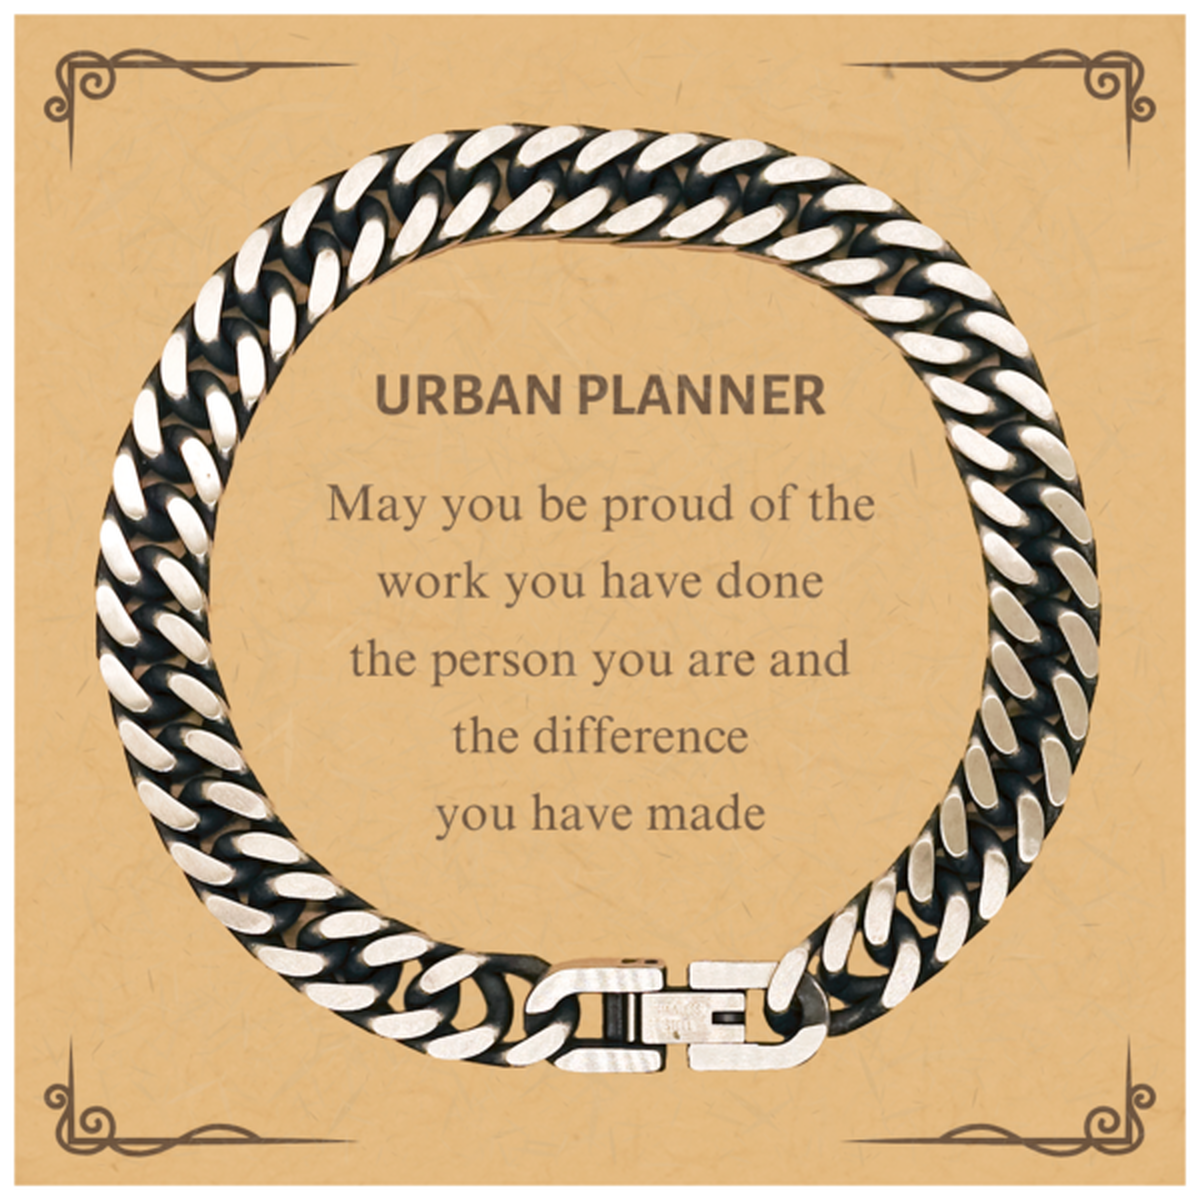 Urban Planner May you be proud of the work you have done, Retirement Urban Planner Cuban Link Chain Bracelet for Colleague Appreciation Gifts Amazing for Urban Planner